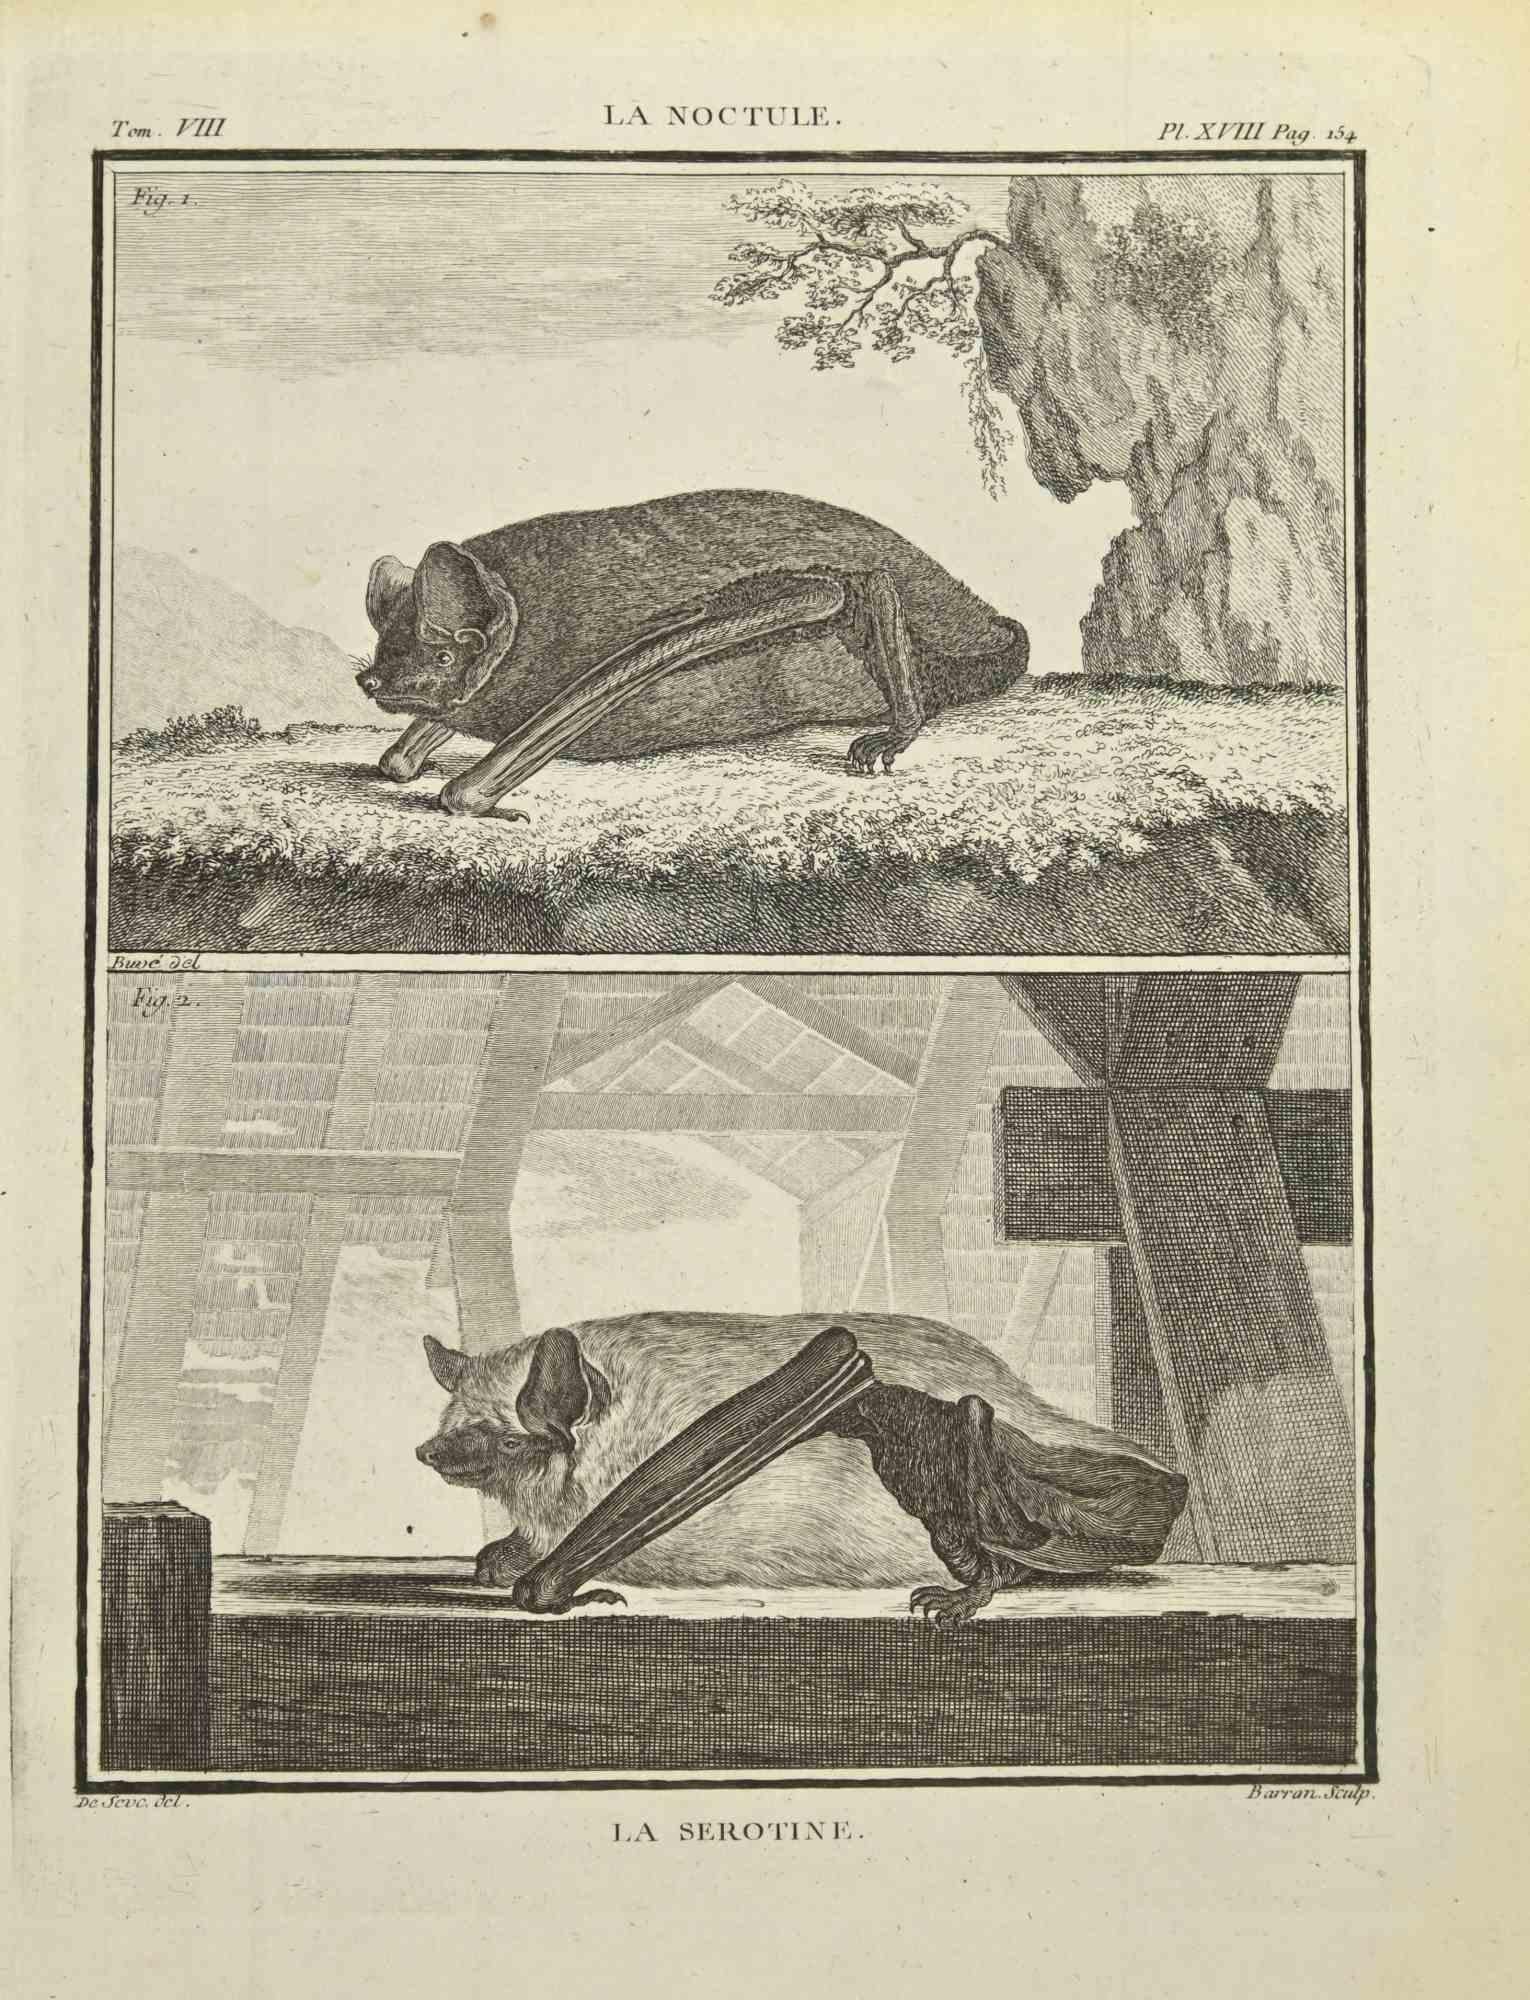 La Lerot is an etching realized by J.L. Barran in 1771.

It belongs to the suite "Histoire Naturelle de Buffon".

The Artist's signature is engraved lower right.

Good conditions.
